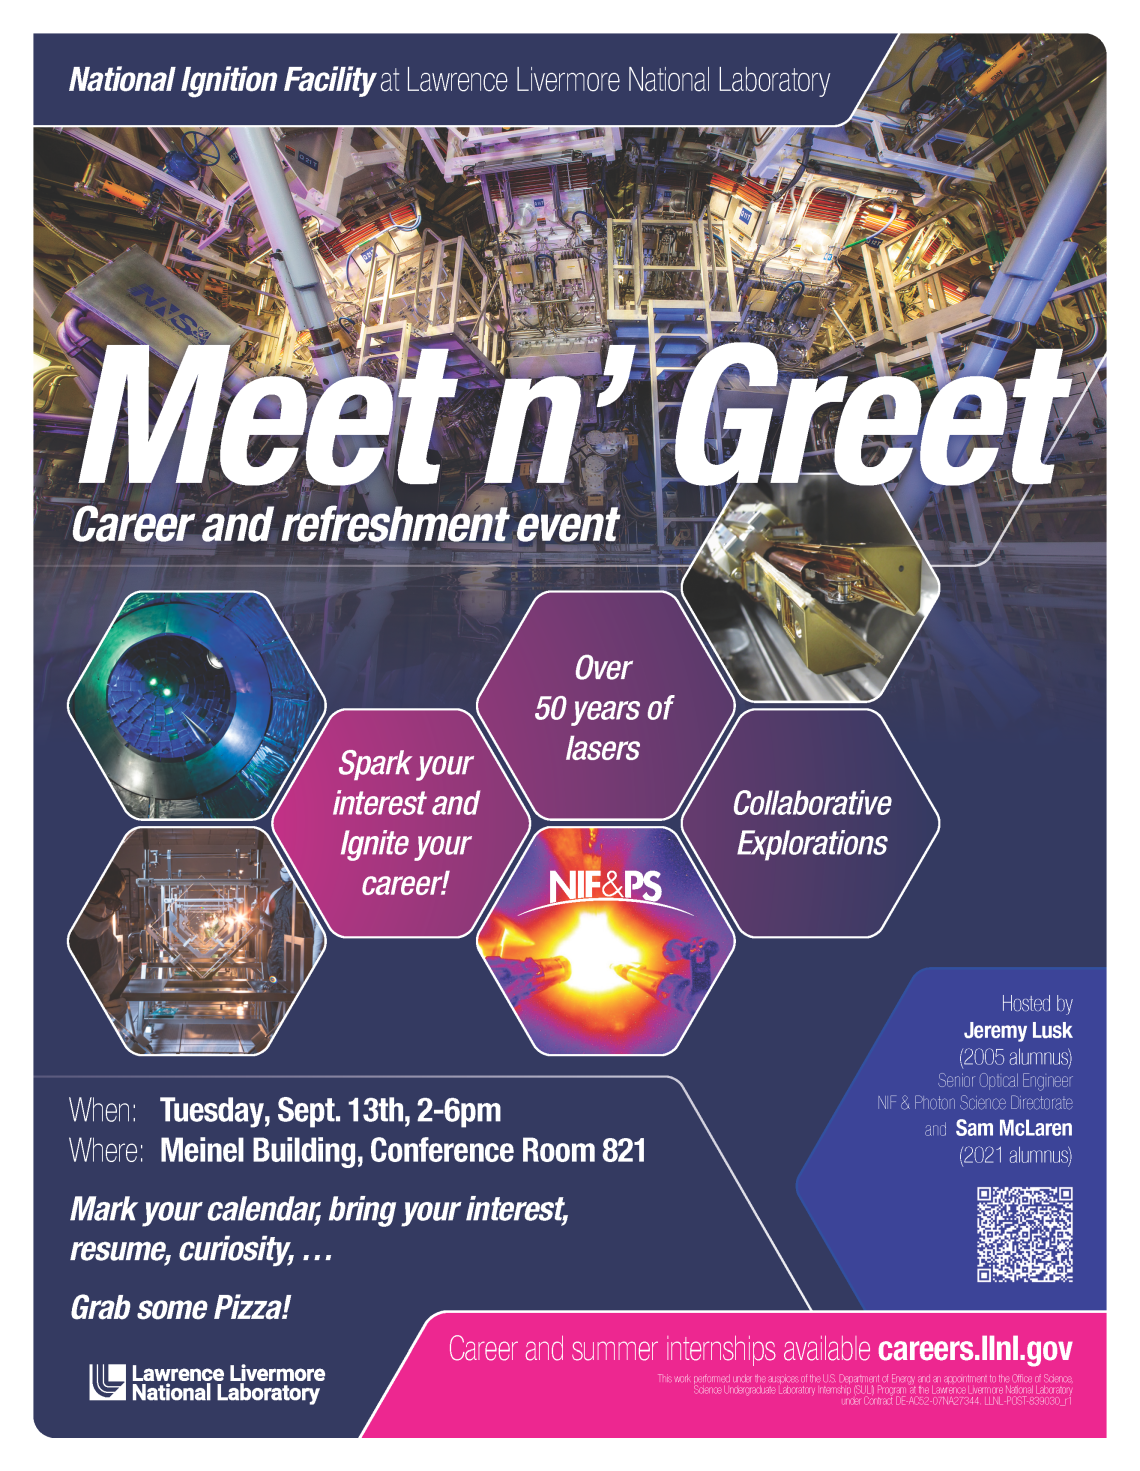 National Ignition Facility at Lawrence Livermore National Laboratory Meet n' Greet - Career and refreshment event  Spark your interest and ignite your career! Over 50 years of lasers Collaborative Explorations  When: Tuesday, September 13th 2-6 pm Where: Meinel Building, Conference Room 821  Mark your calendar, bring your interest, resume, curiosity... Grab some Pizza!  Careers and summer internships available careers.llnl.gov